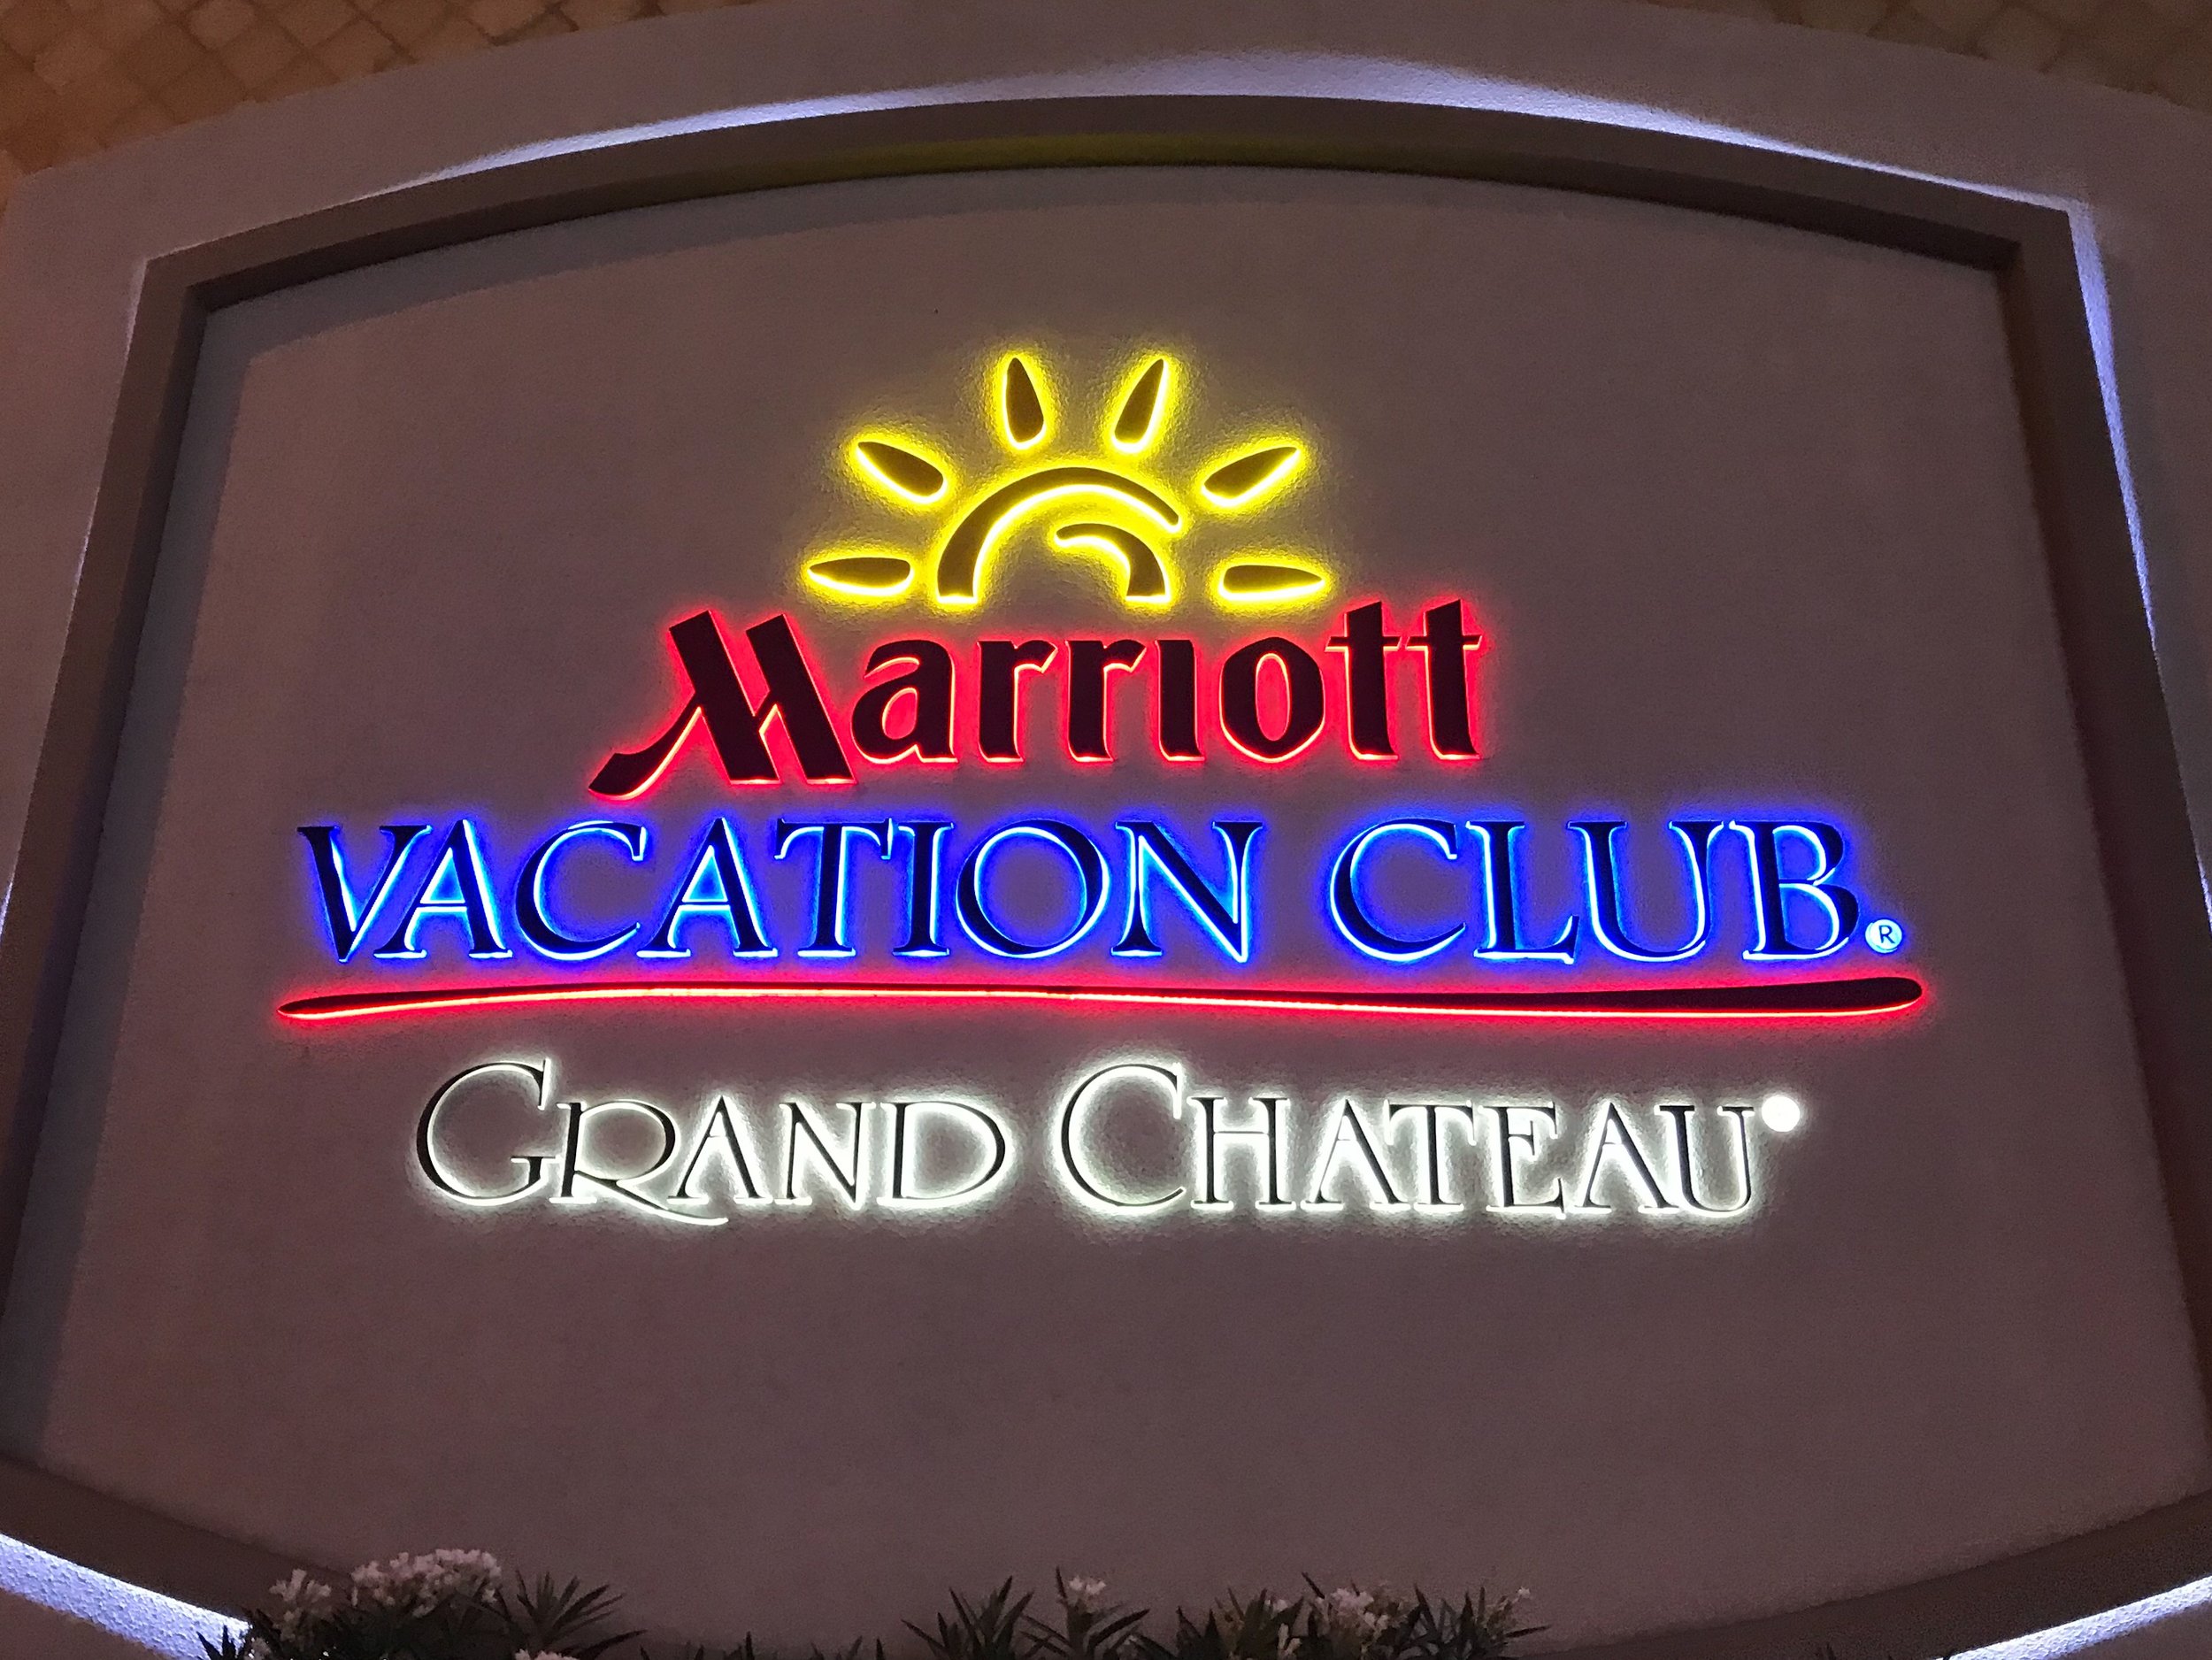 Marriott's Grand Chateau